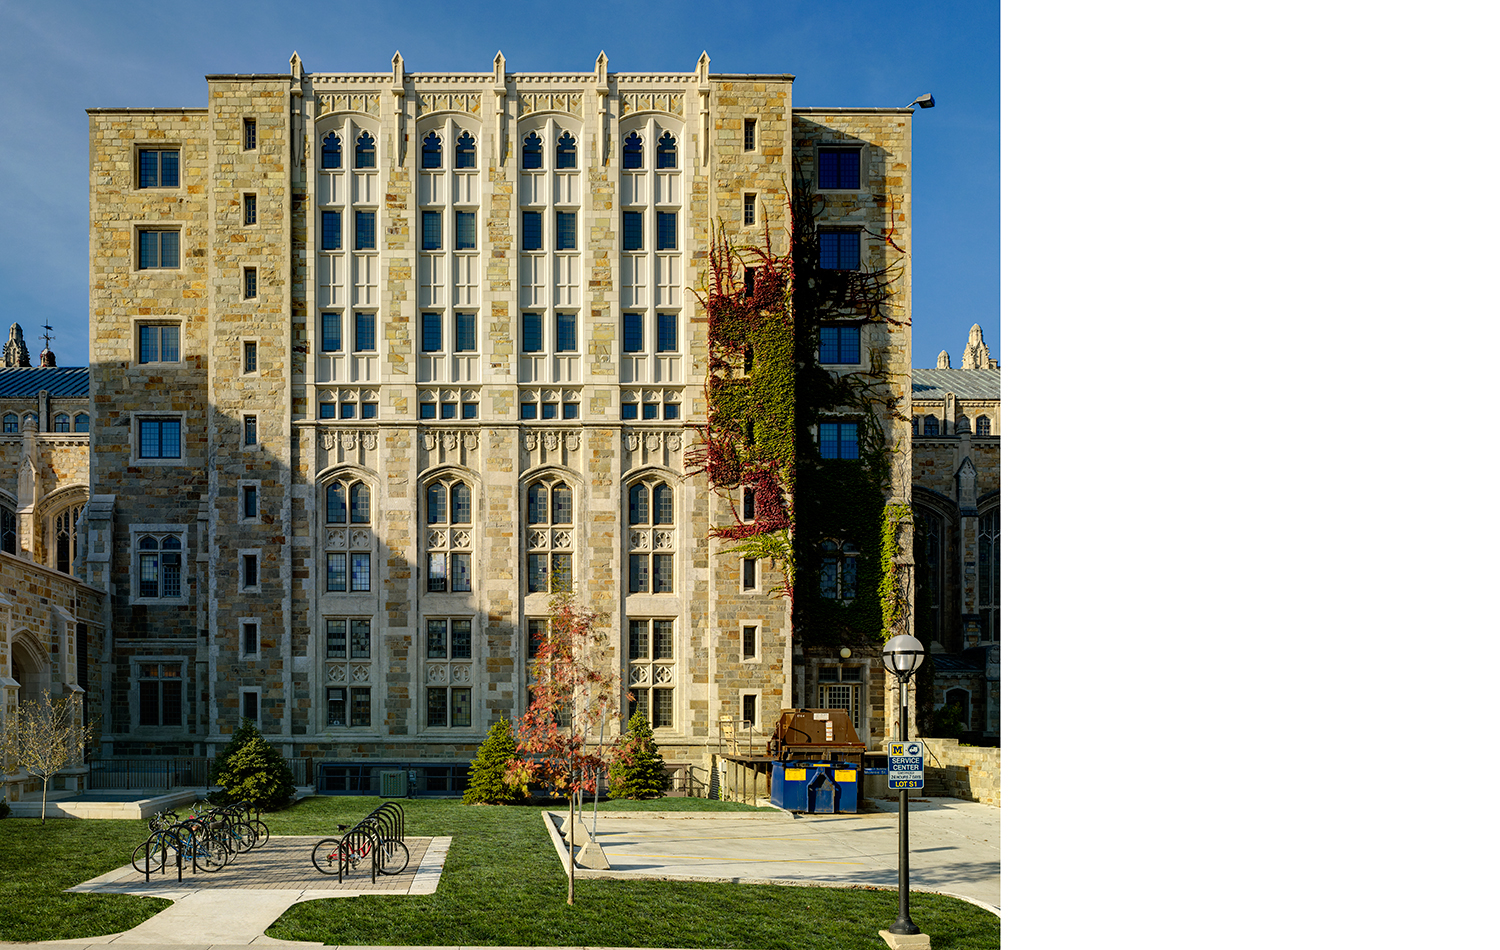 UofM_Law_School_Commons_PM_Ext-022-fused-dc3.jpg